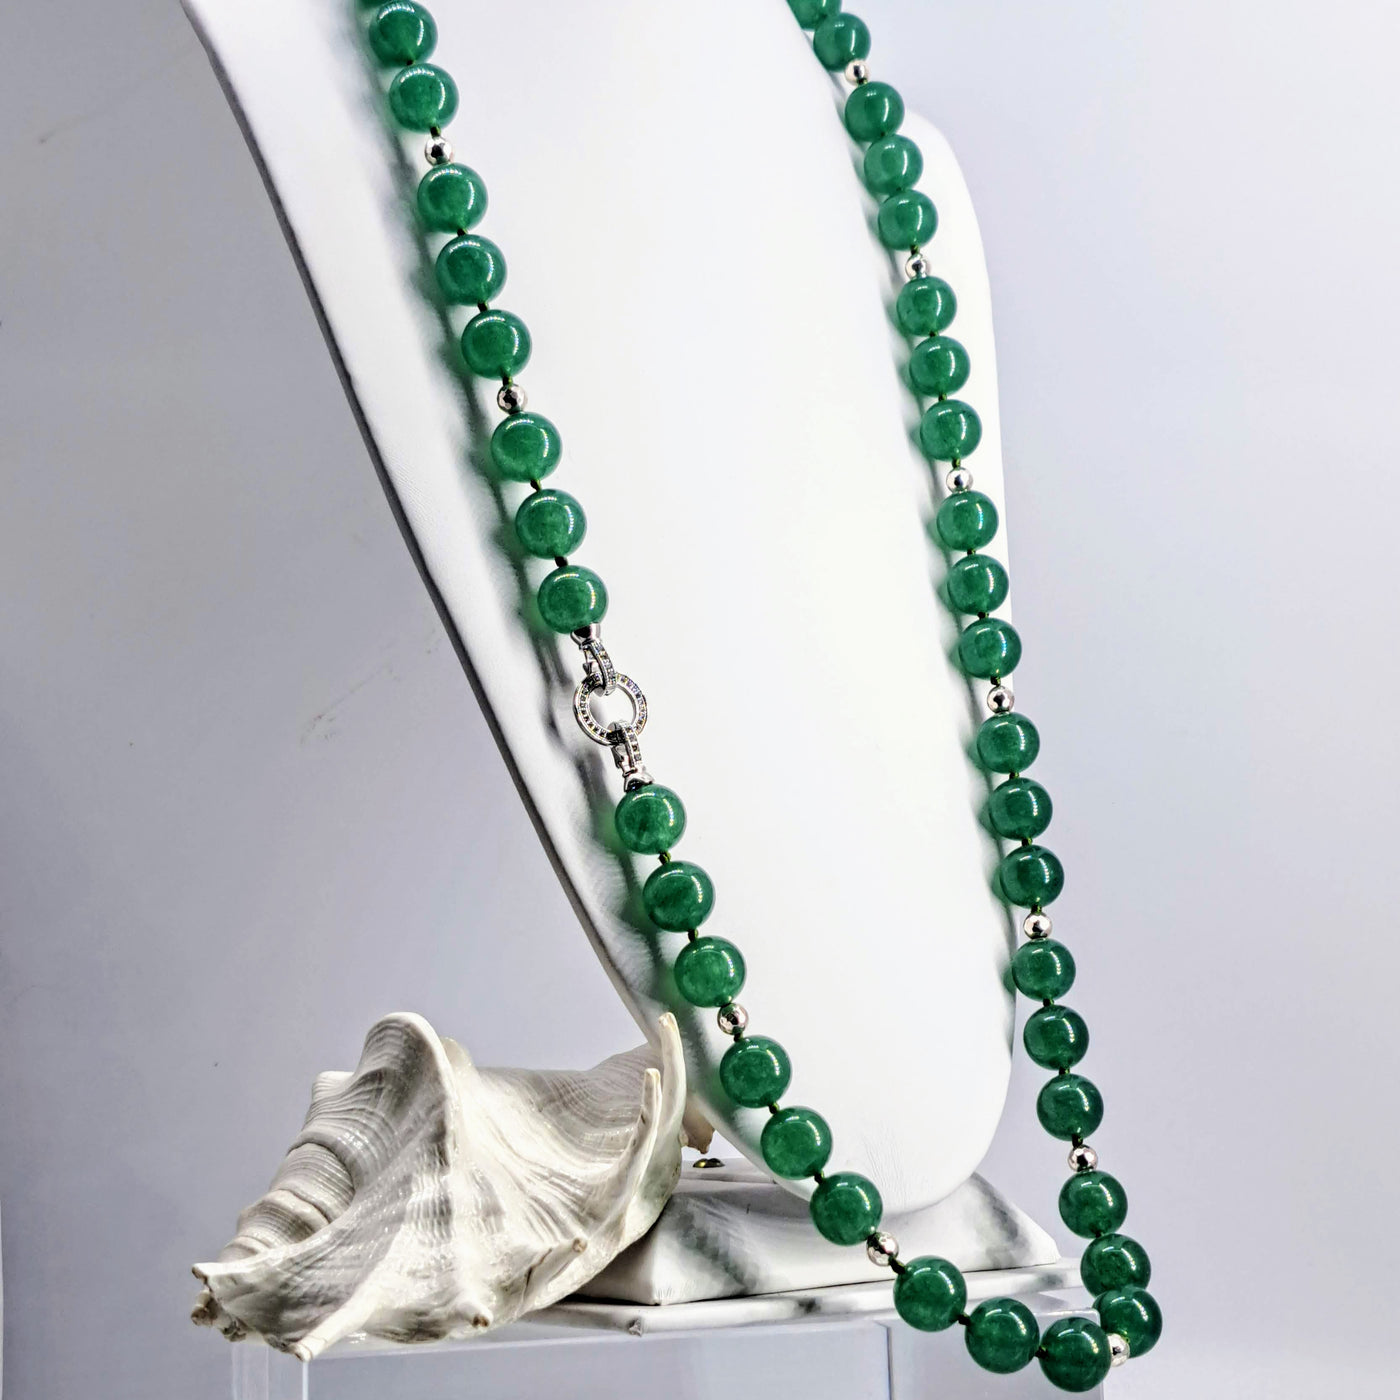 "Summer Greens" Necklace - Green Onyx, Sterling, White Topaz